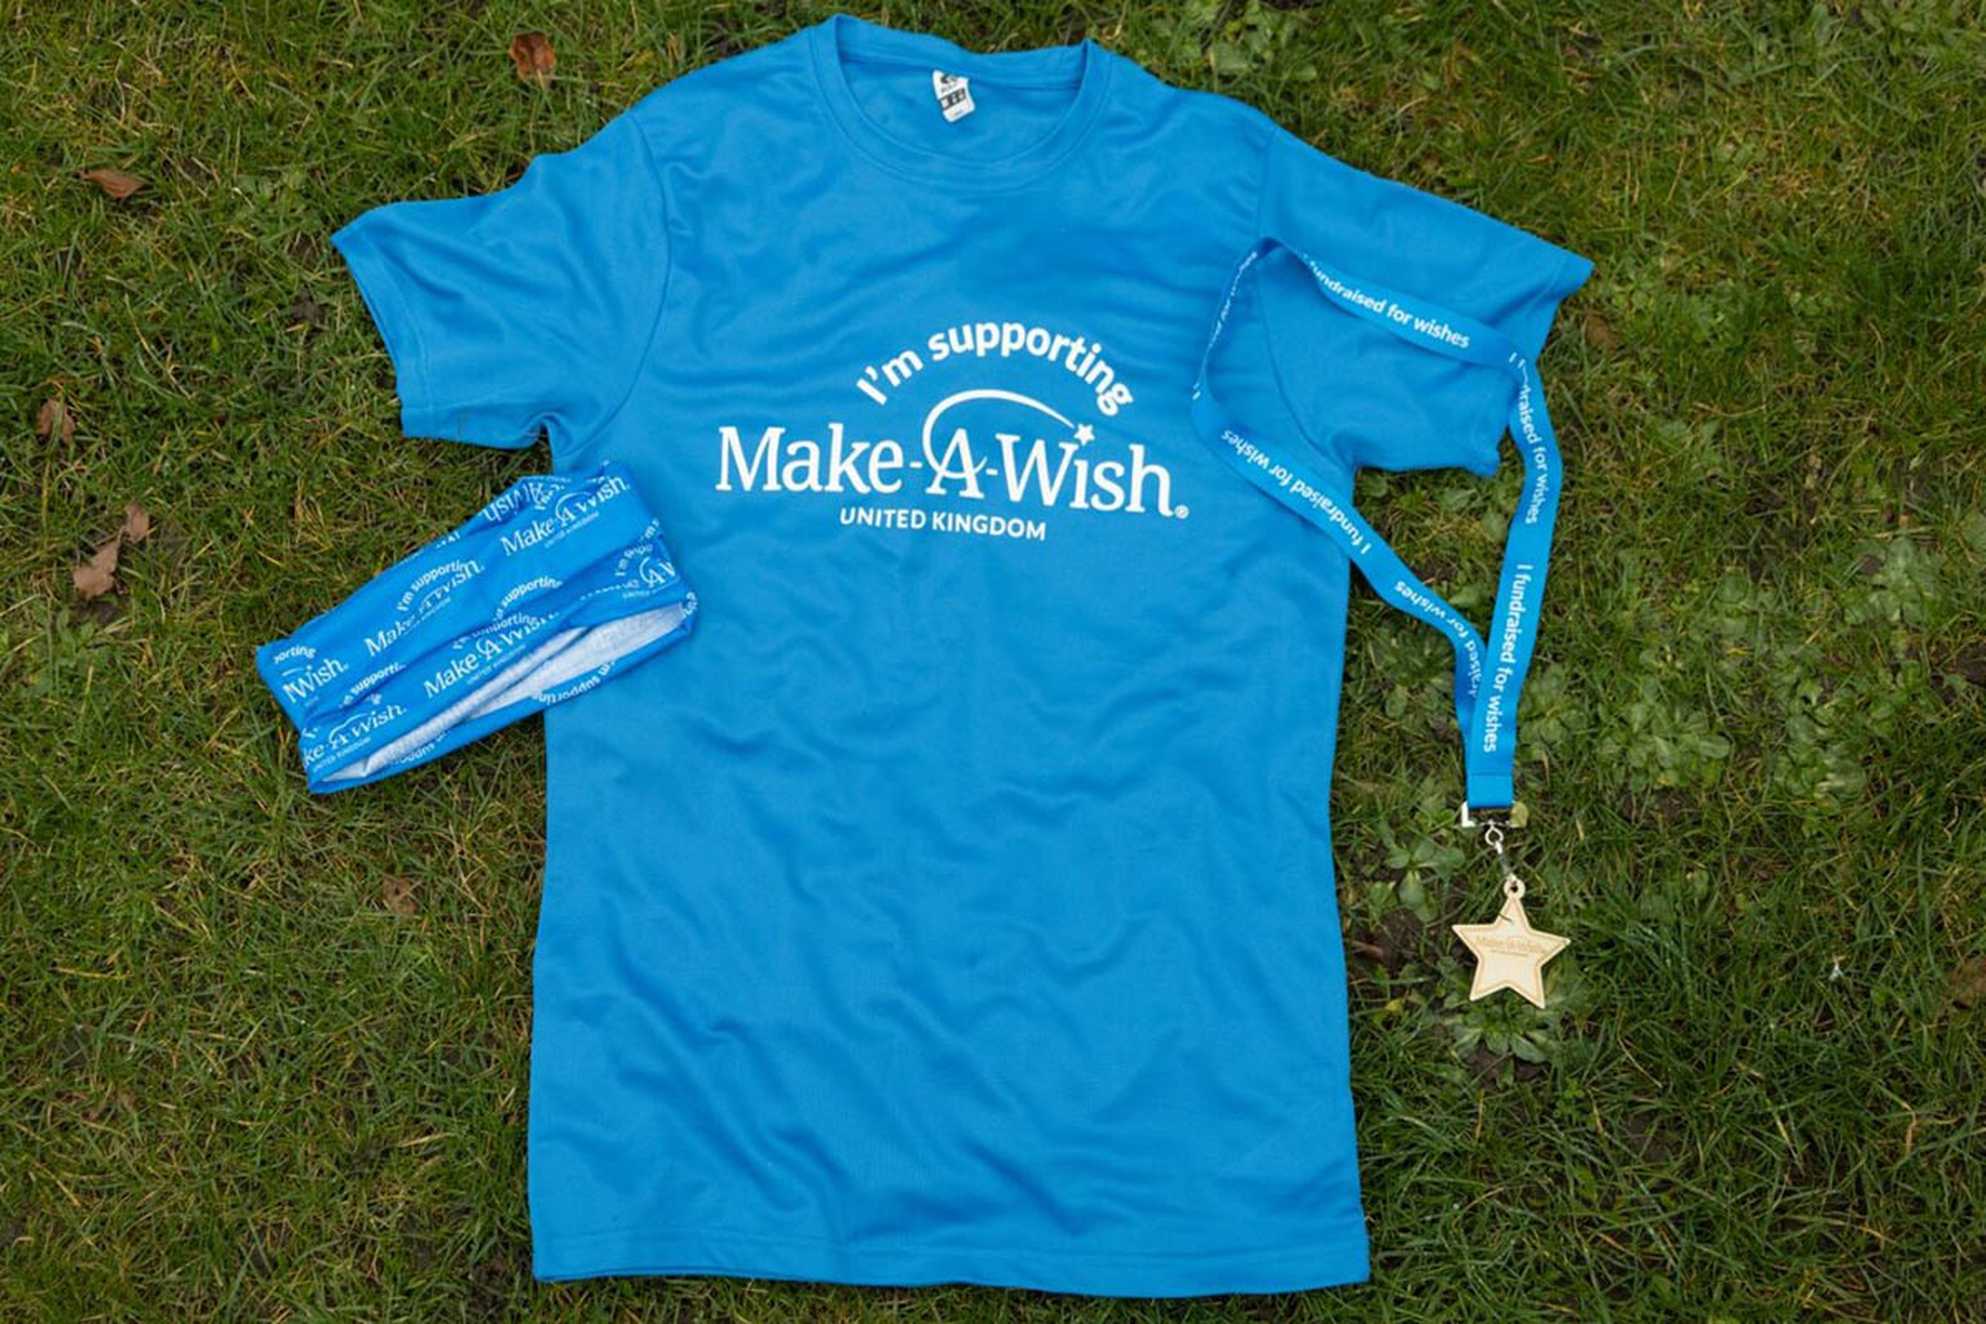 A Make-A-Wish UK t-shirt, buff and medal laid out flat on a grassed area.